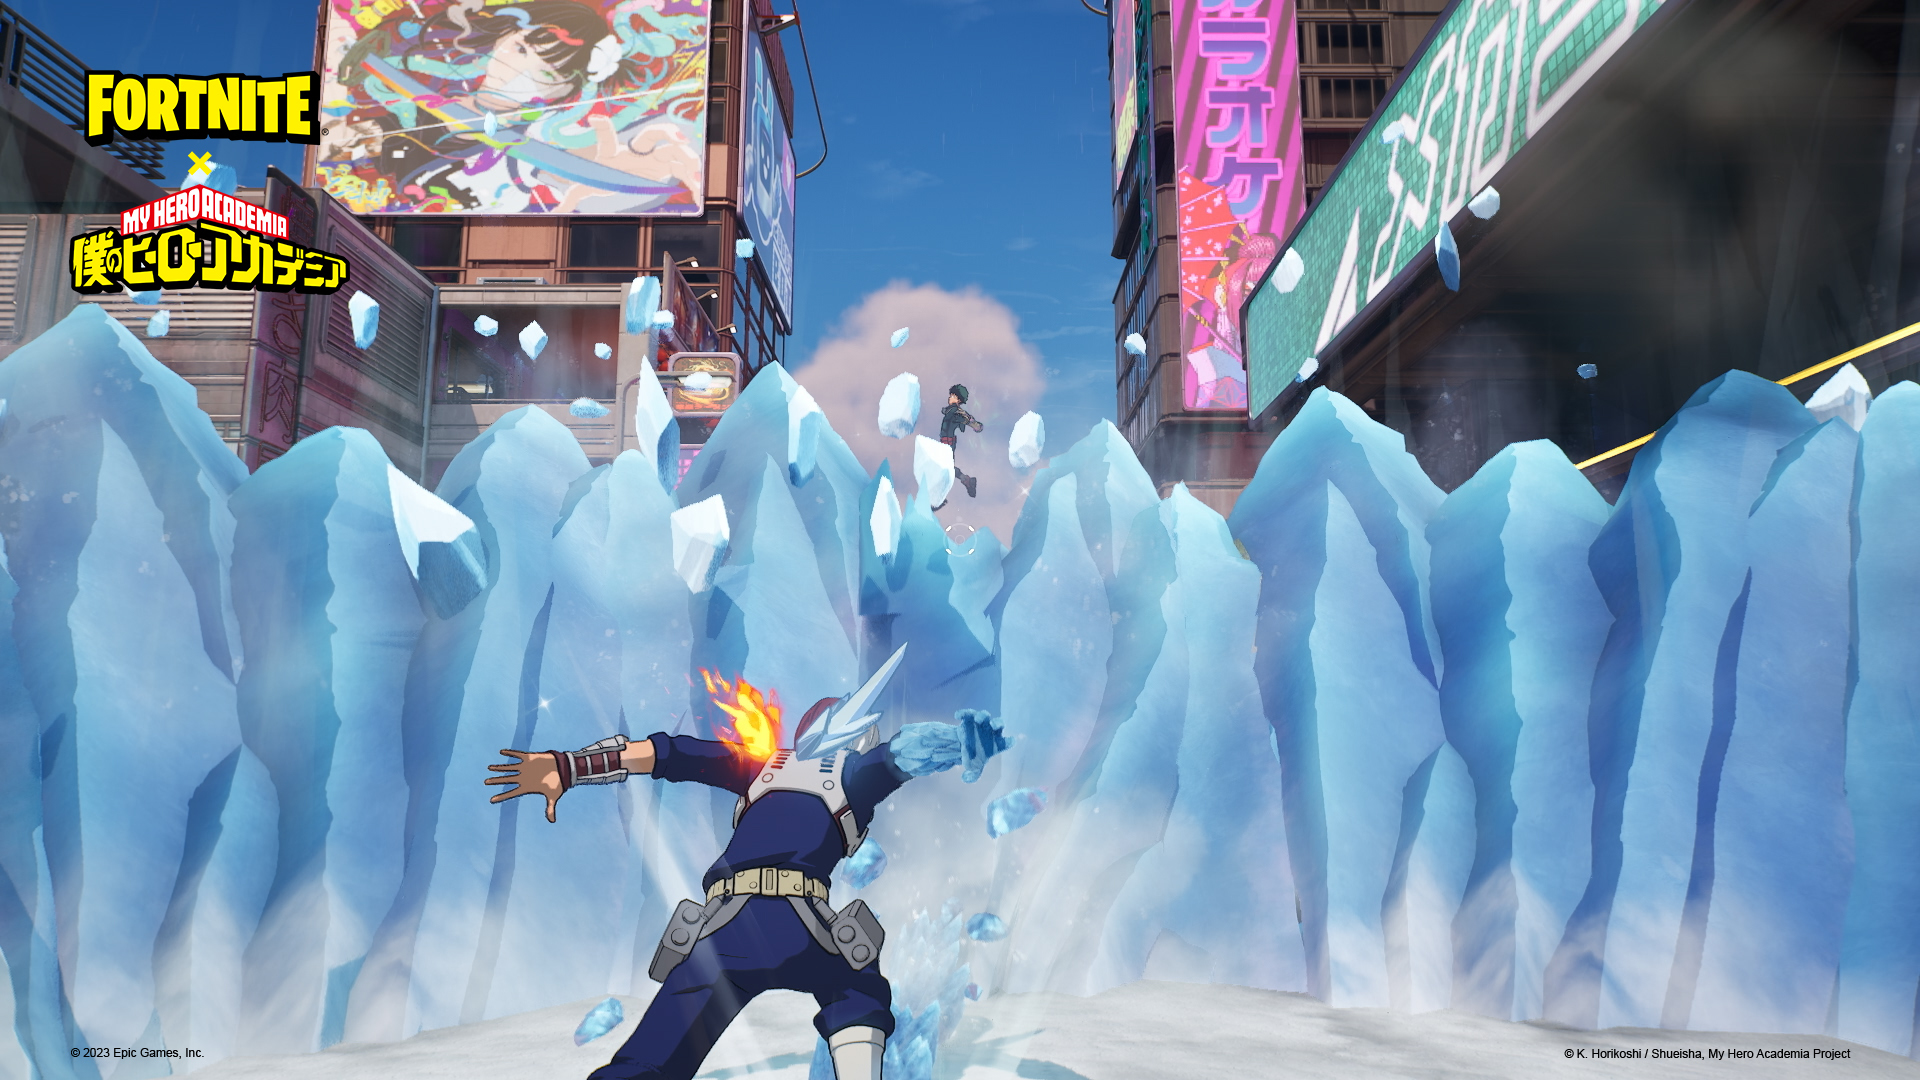 Fortnite My Hero Academia Event Returns With Three New Skins And Lots Of XP  - GameSpot